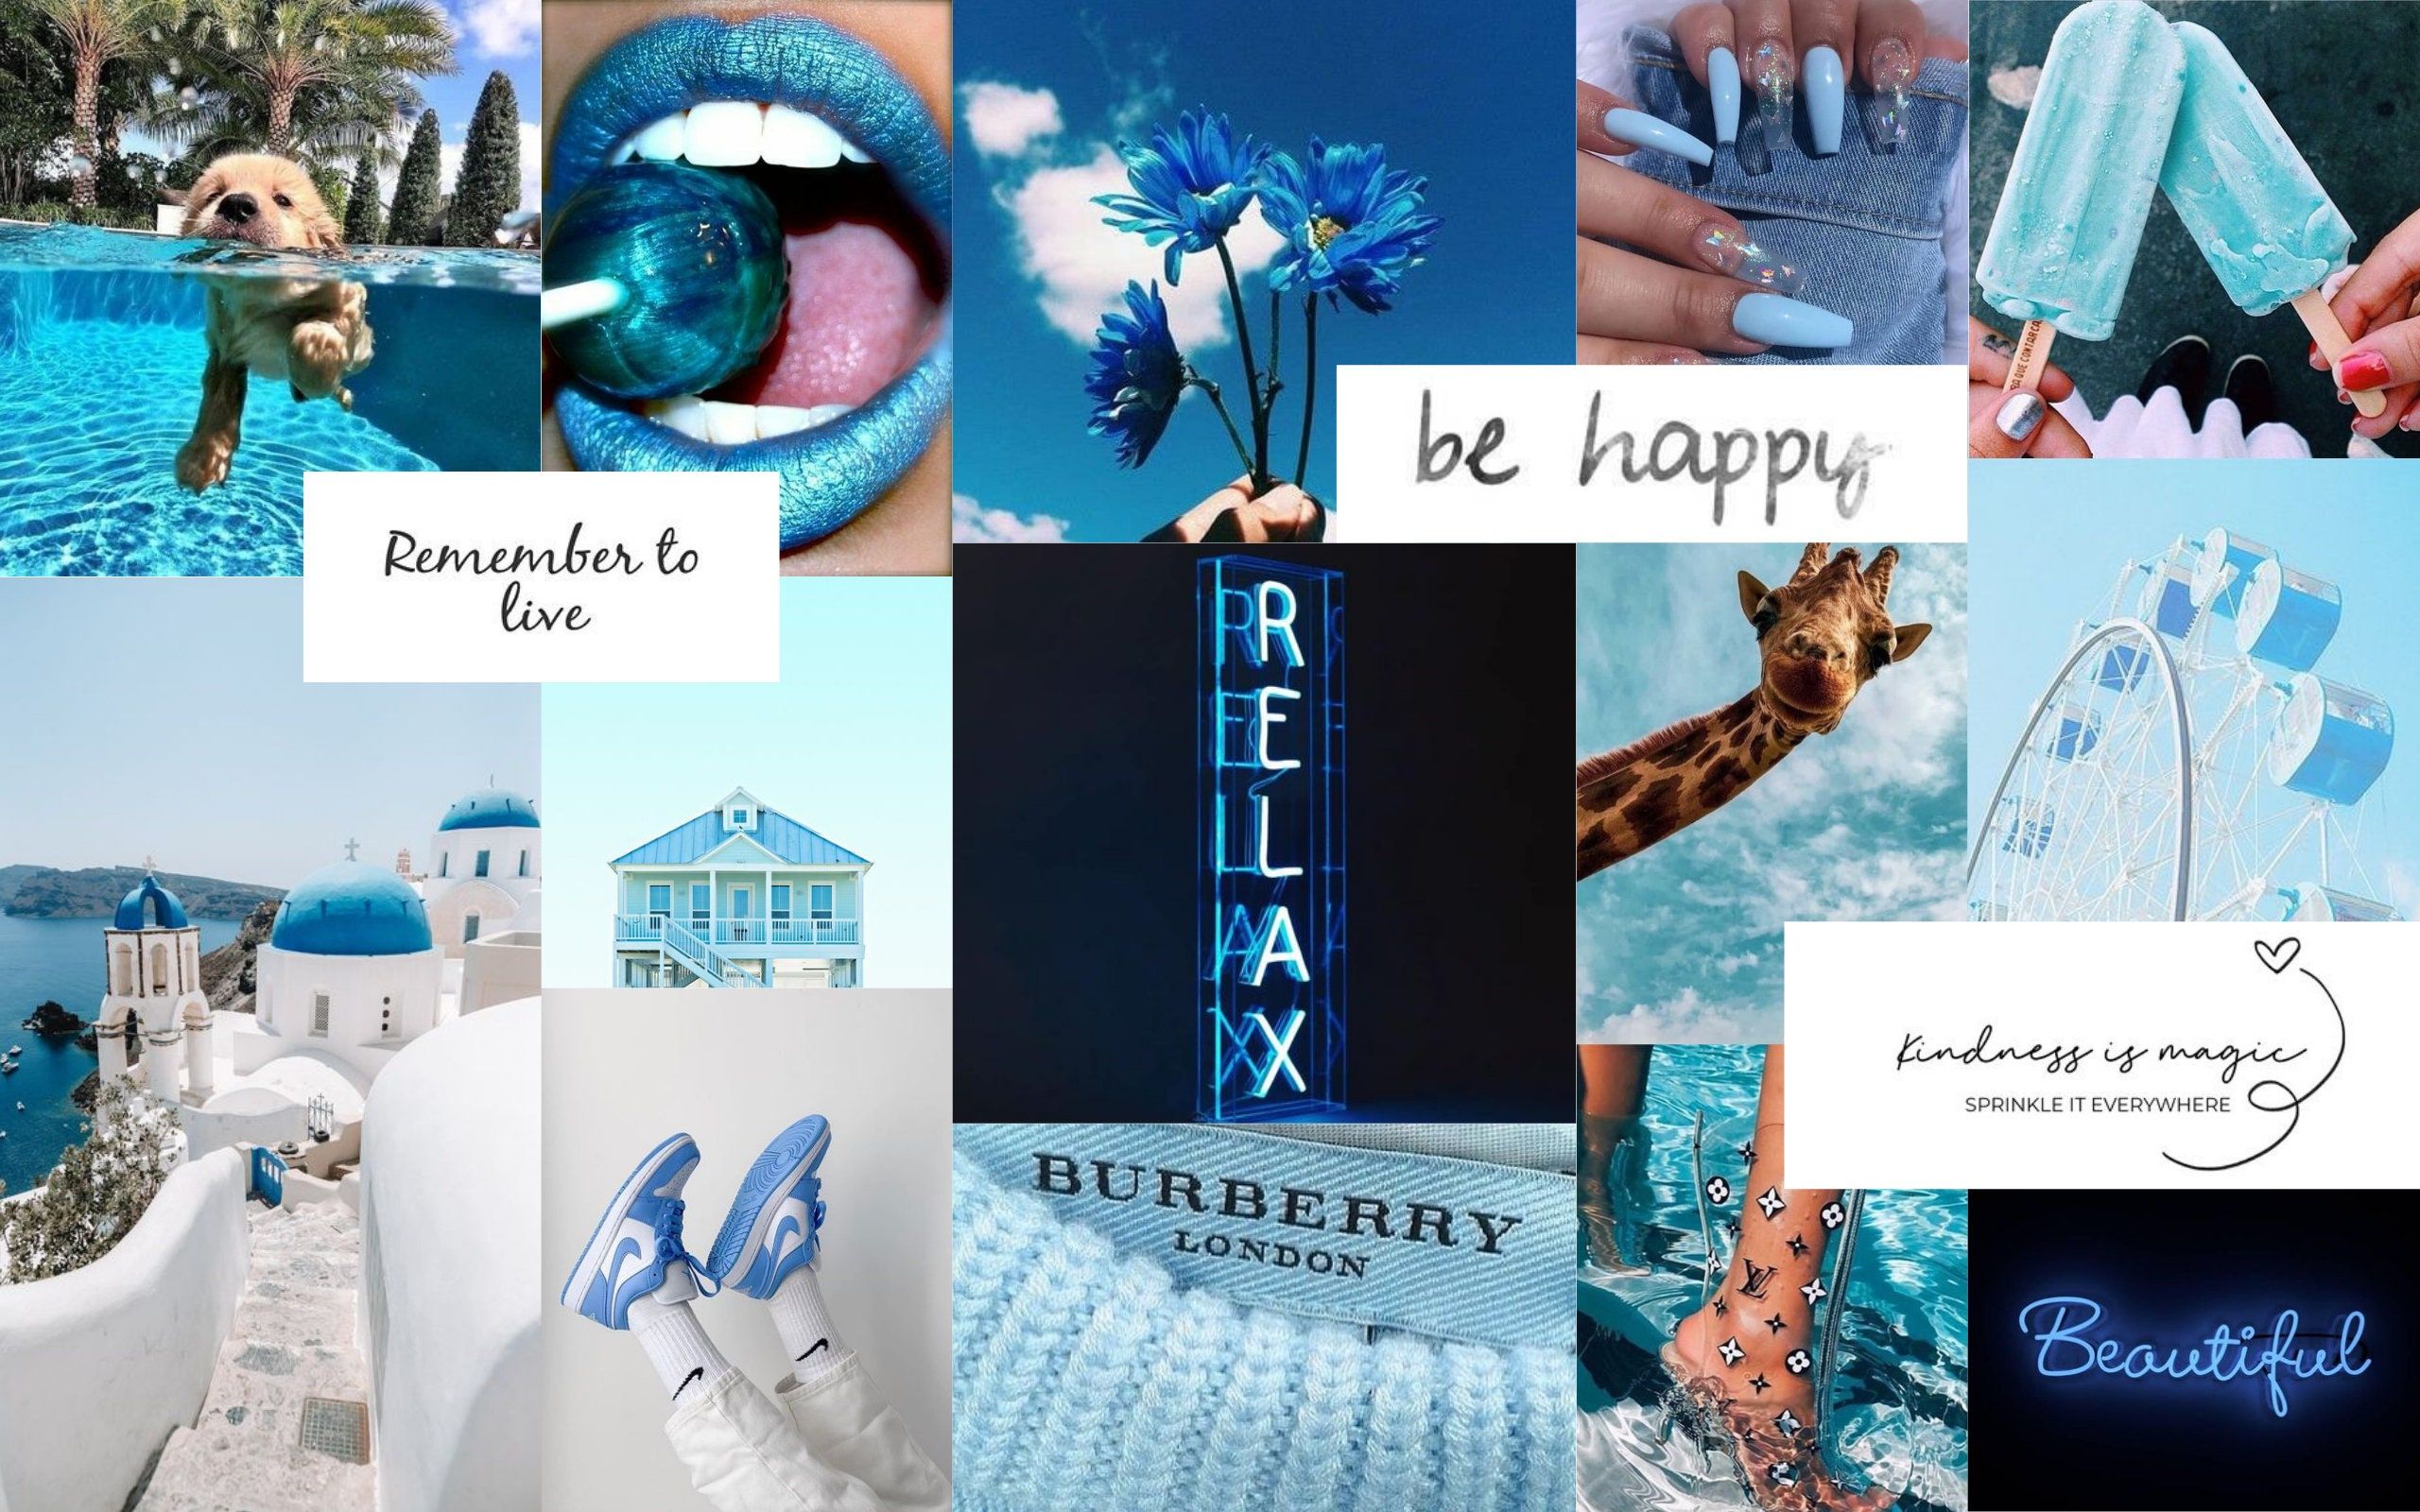 A collage of blue aesthetic pictures including blue lips, a dog in a pool, a giraffe, and a ferris wheel. - Teal, cyan, blue, collage, magic, blue anime, California